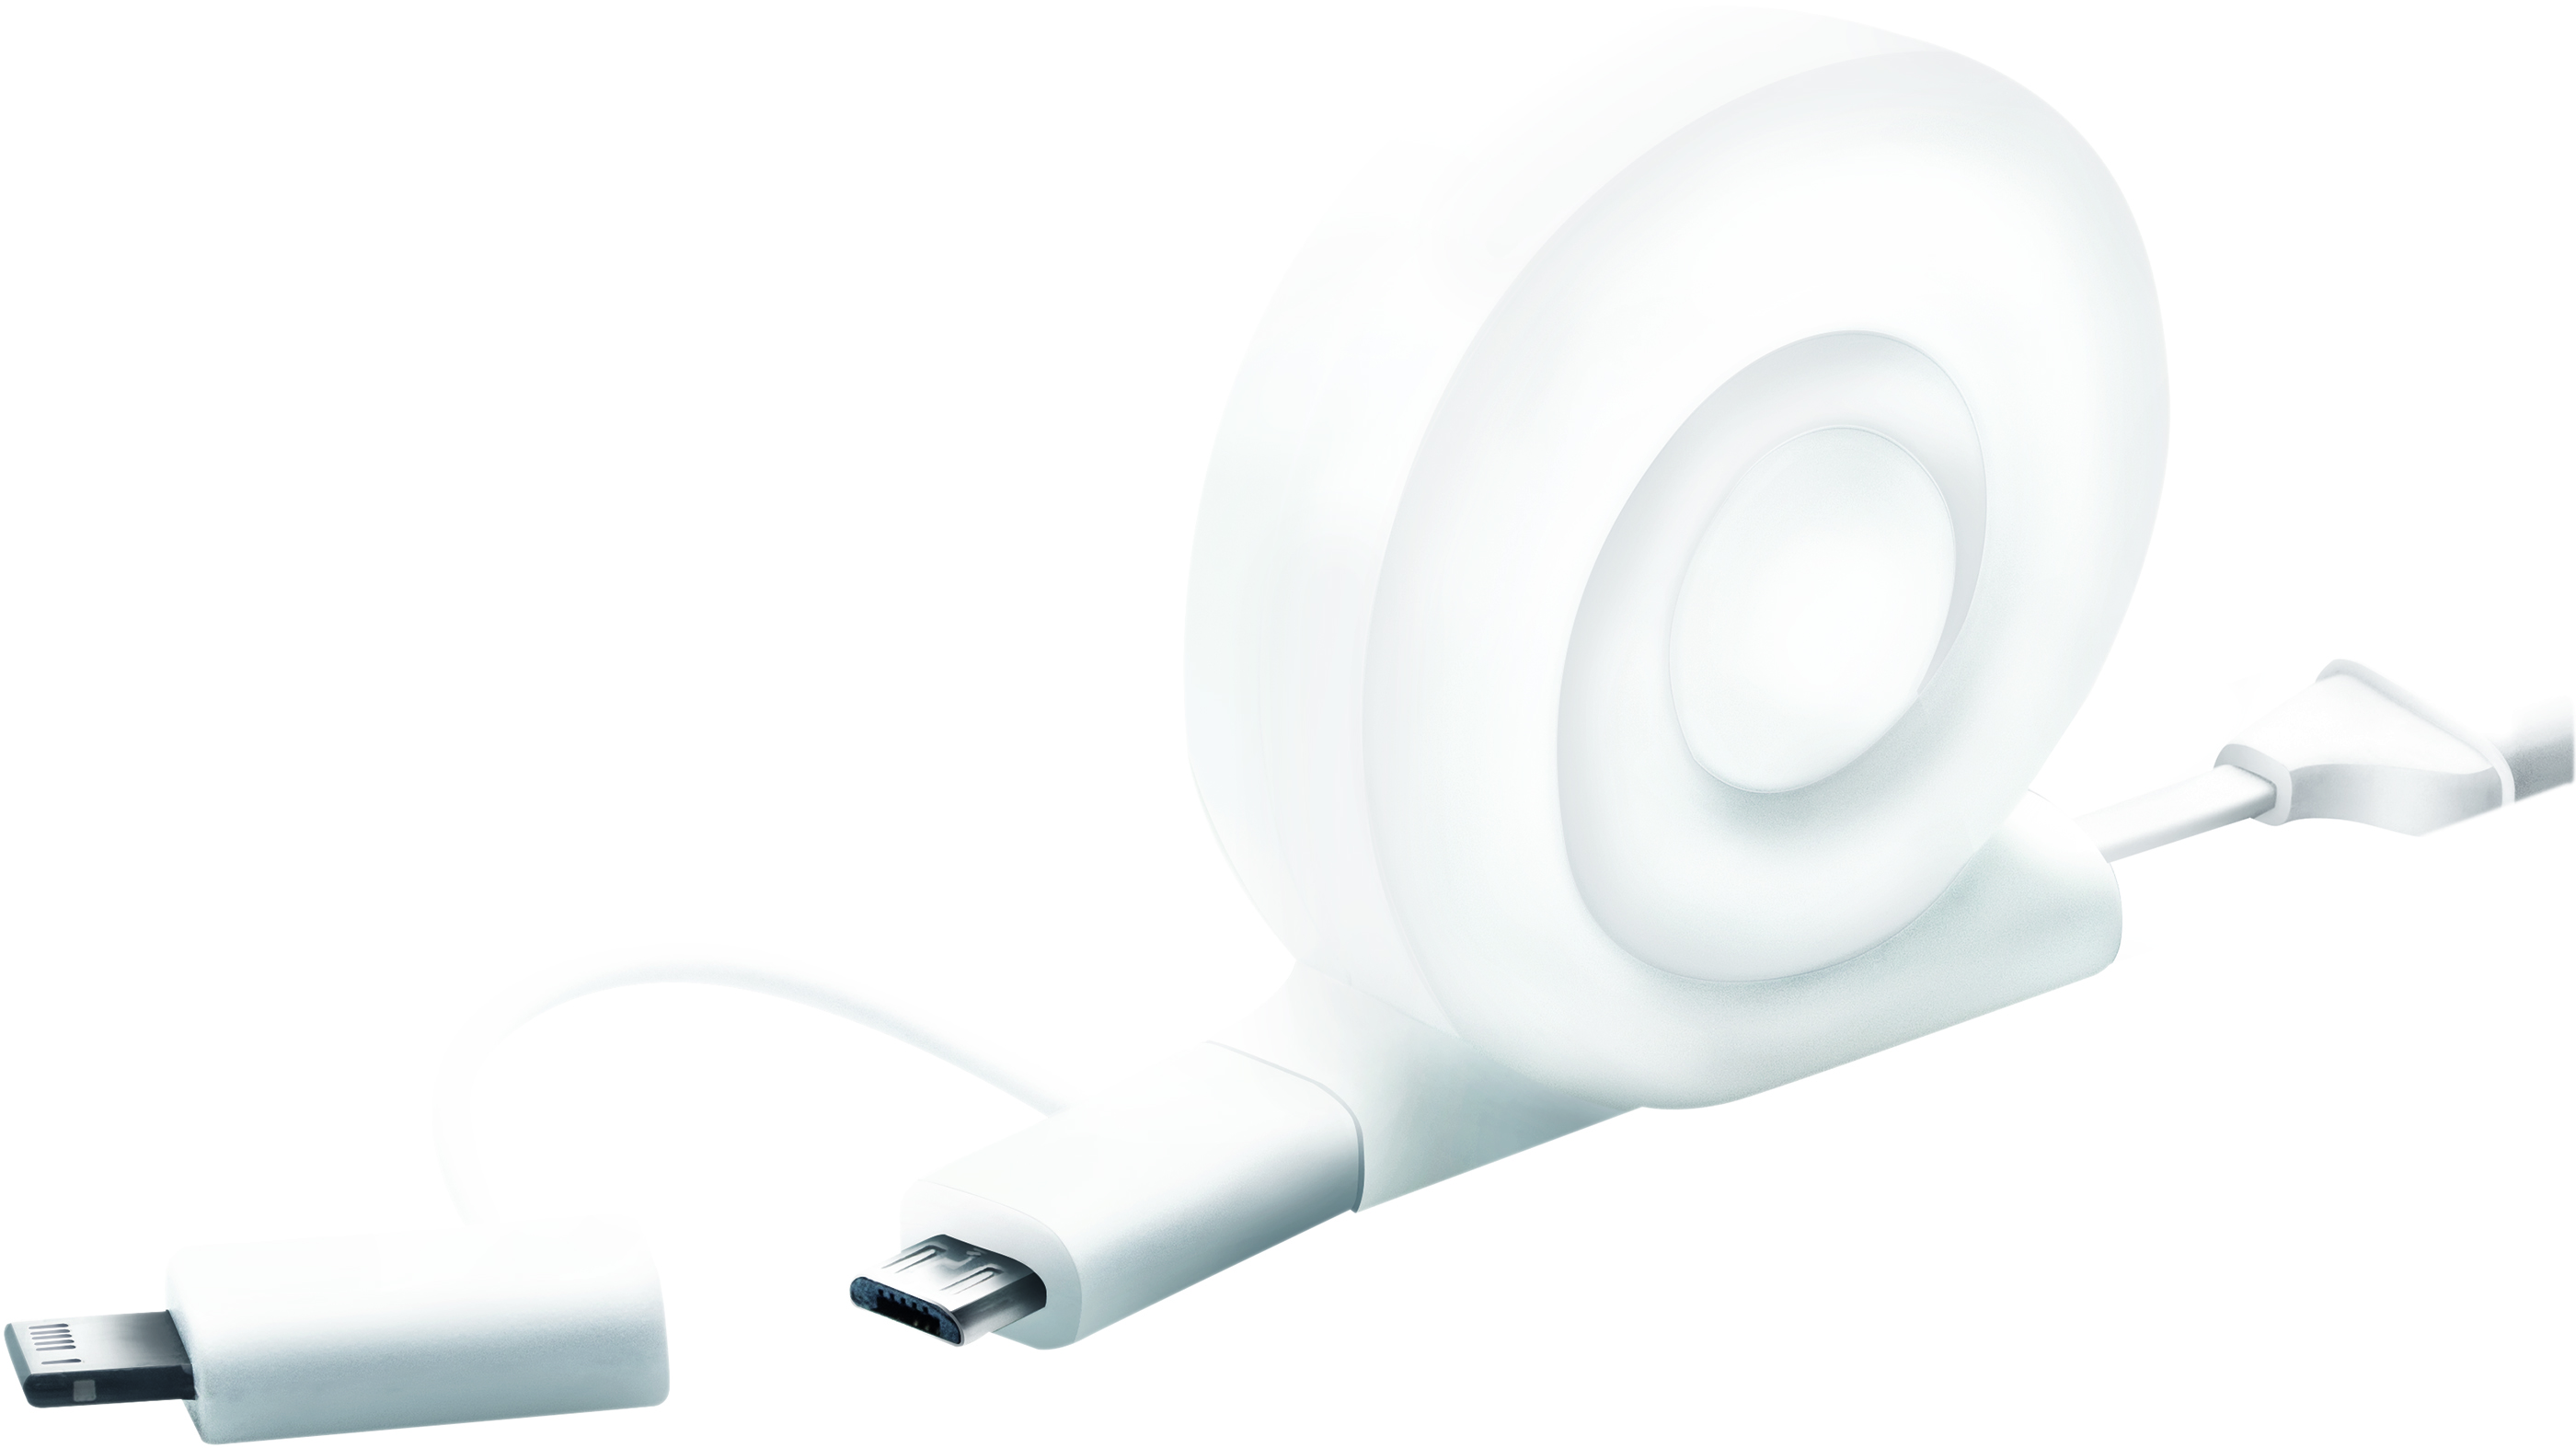 Snail 2-in-1 Micro USB cable with MFI iPhone 5/6 adapter, retractable